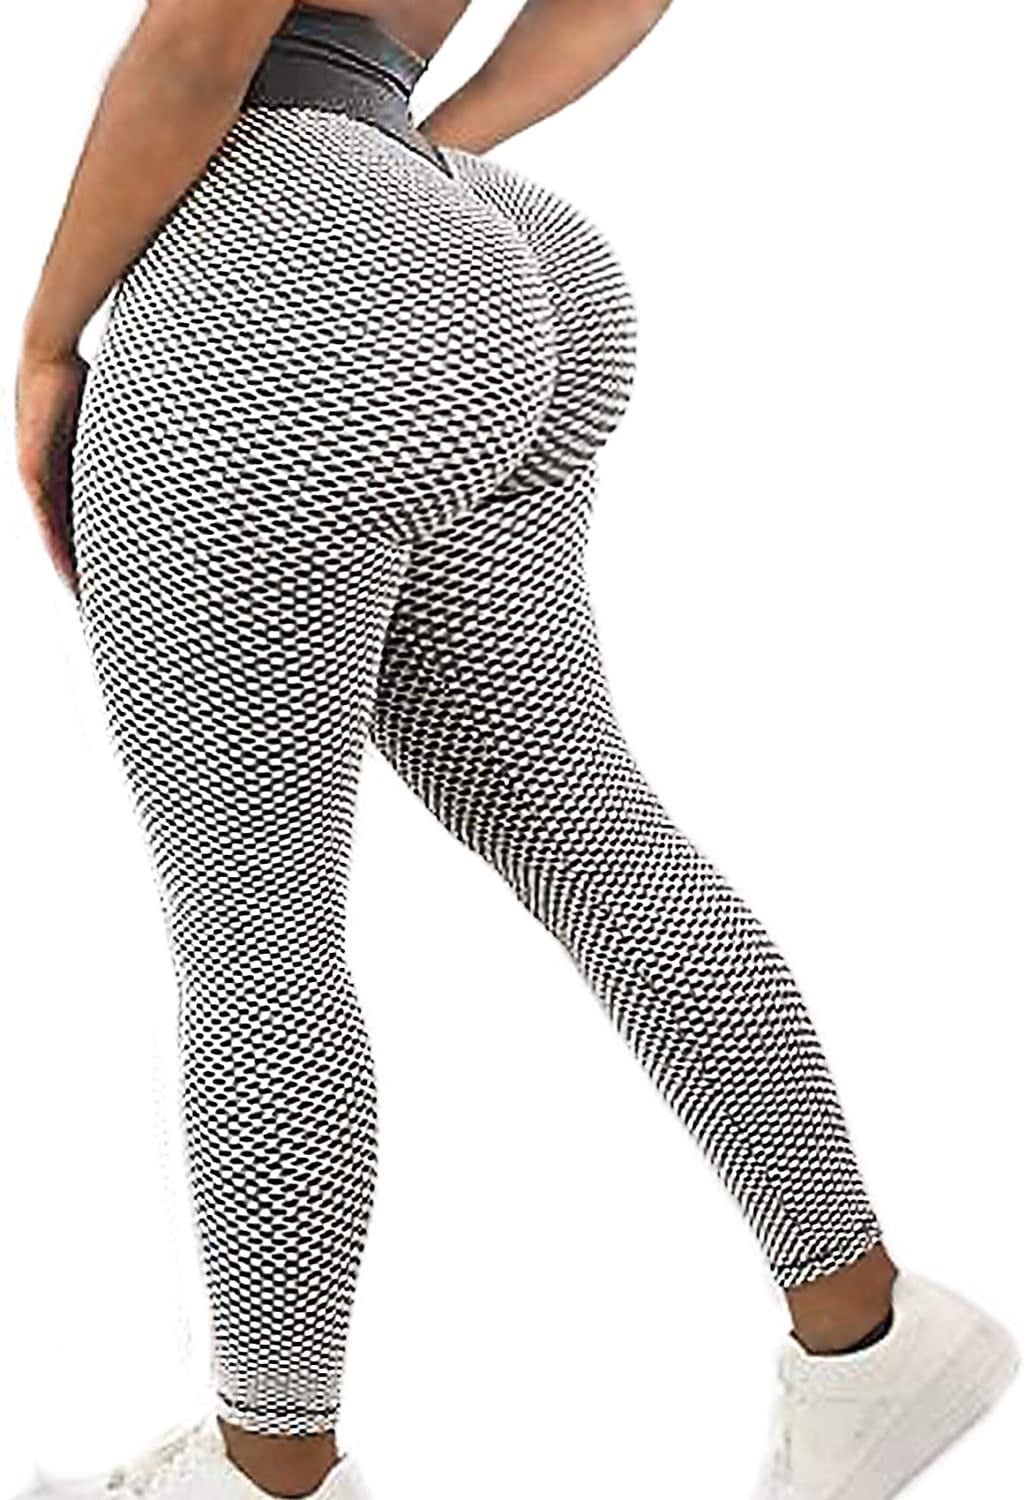 SEASUM Women High Waisted Workout Yoga Pants Butt Lifting Scrunch Booty Leggings Tummy Control Anti Cellulite Textured Tights 